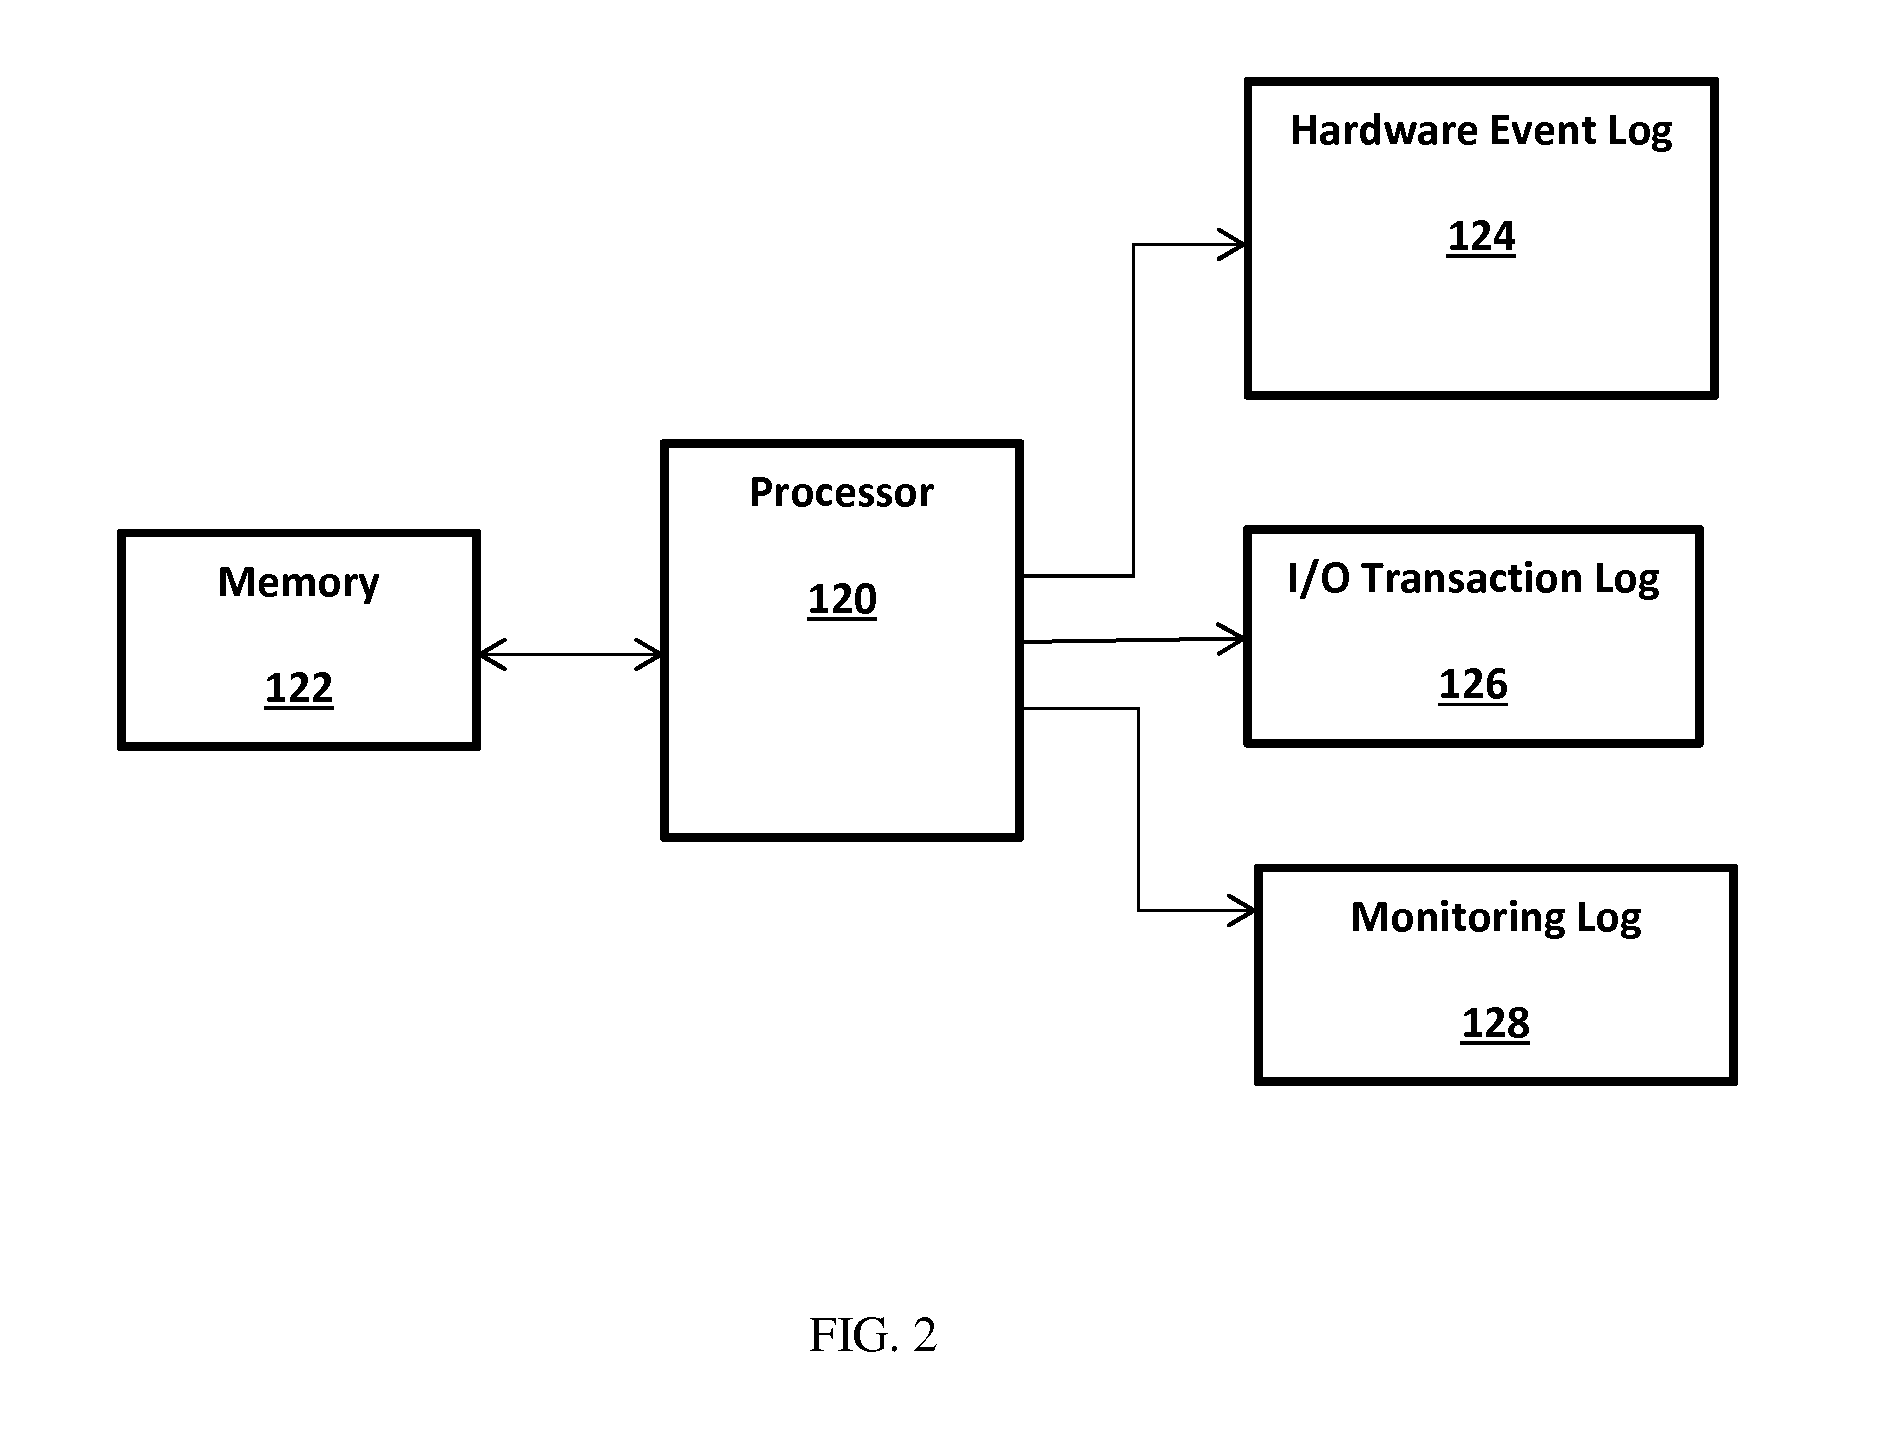 Method and system for port performance ranking in multi-protocol switch